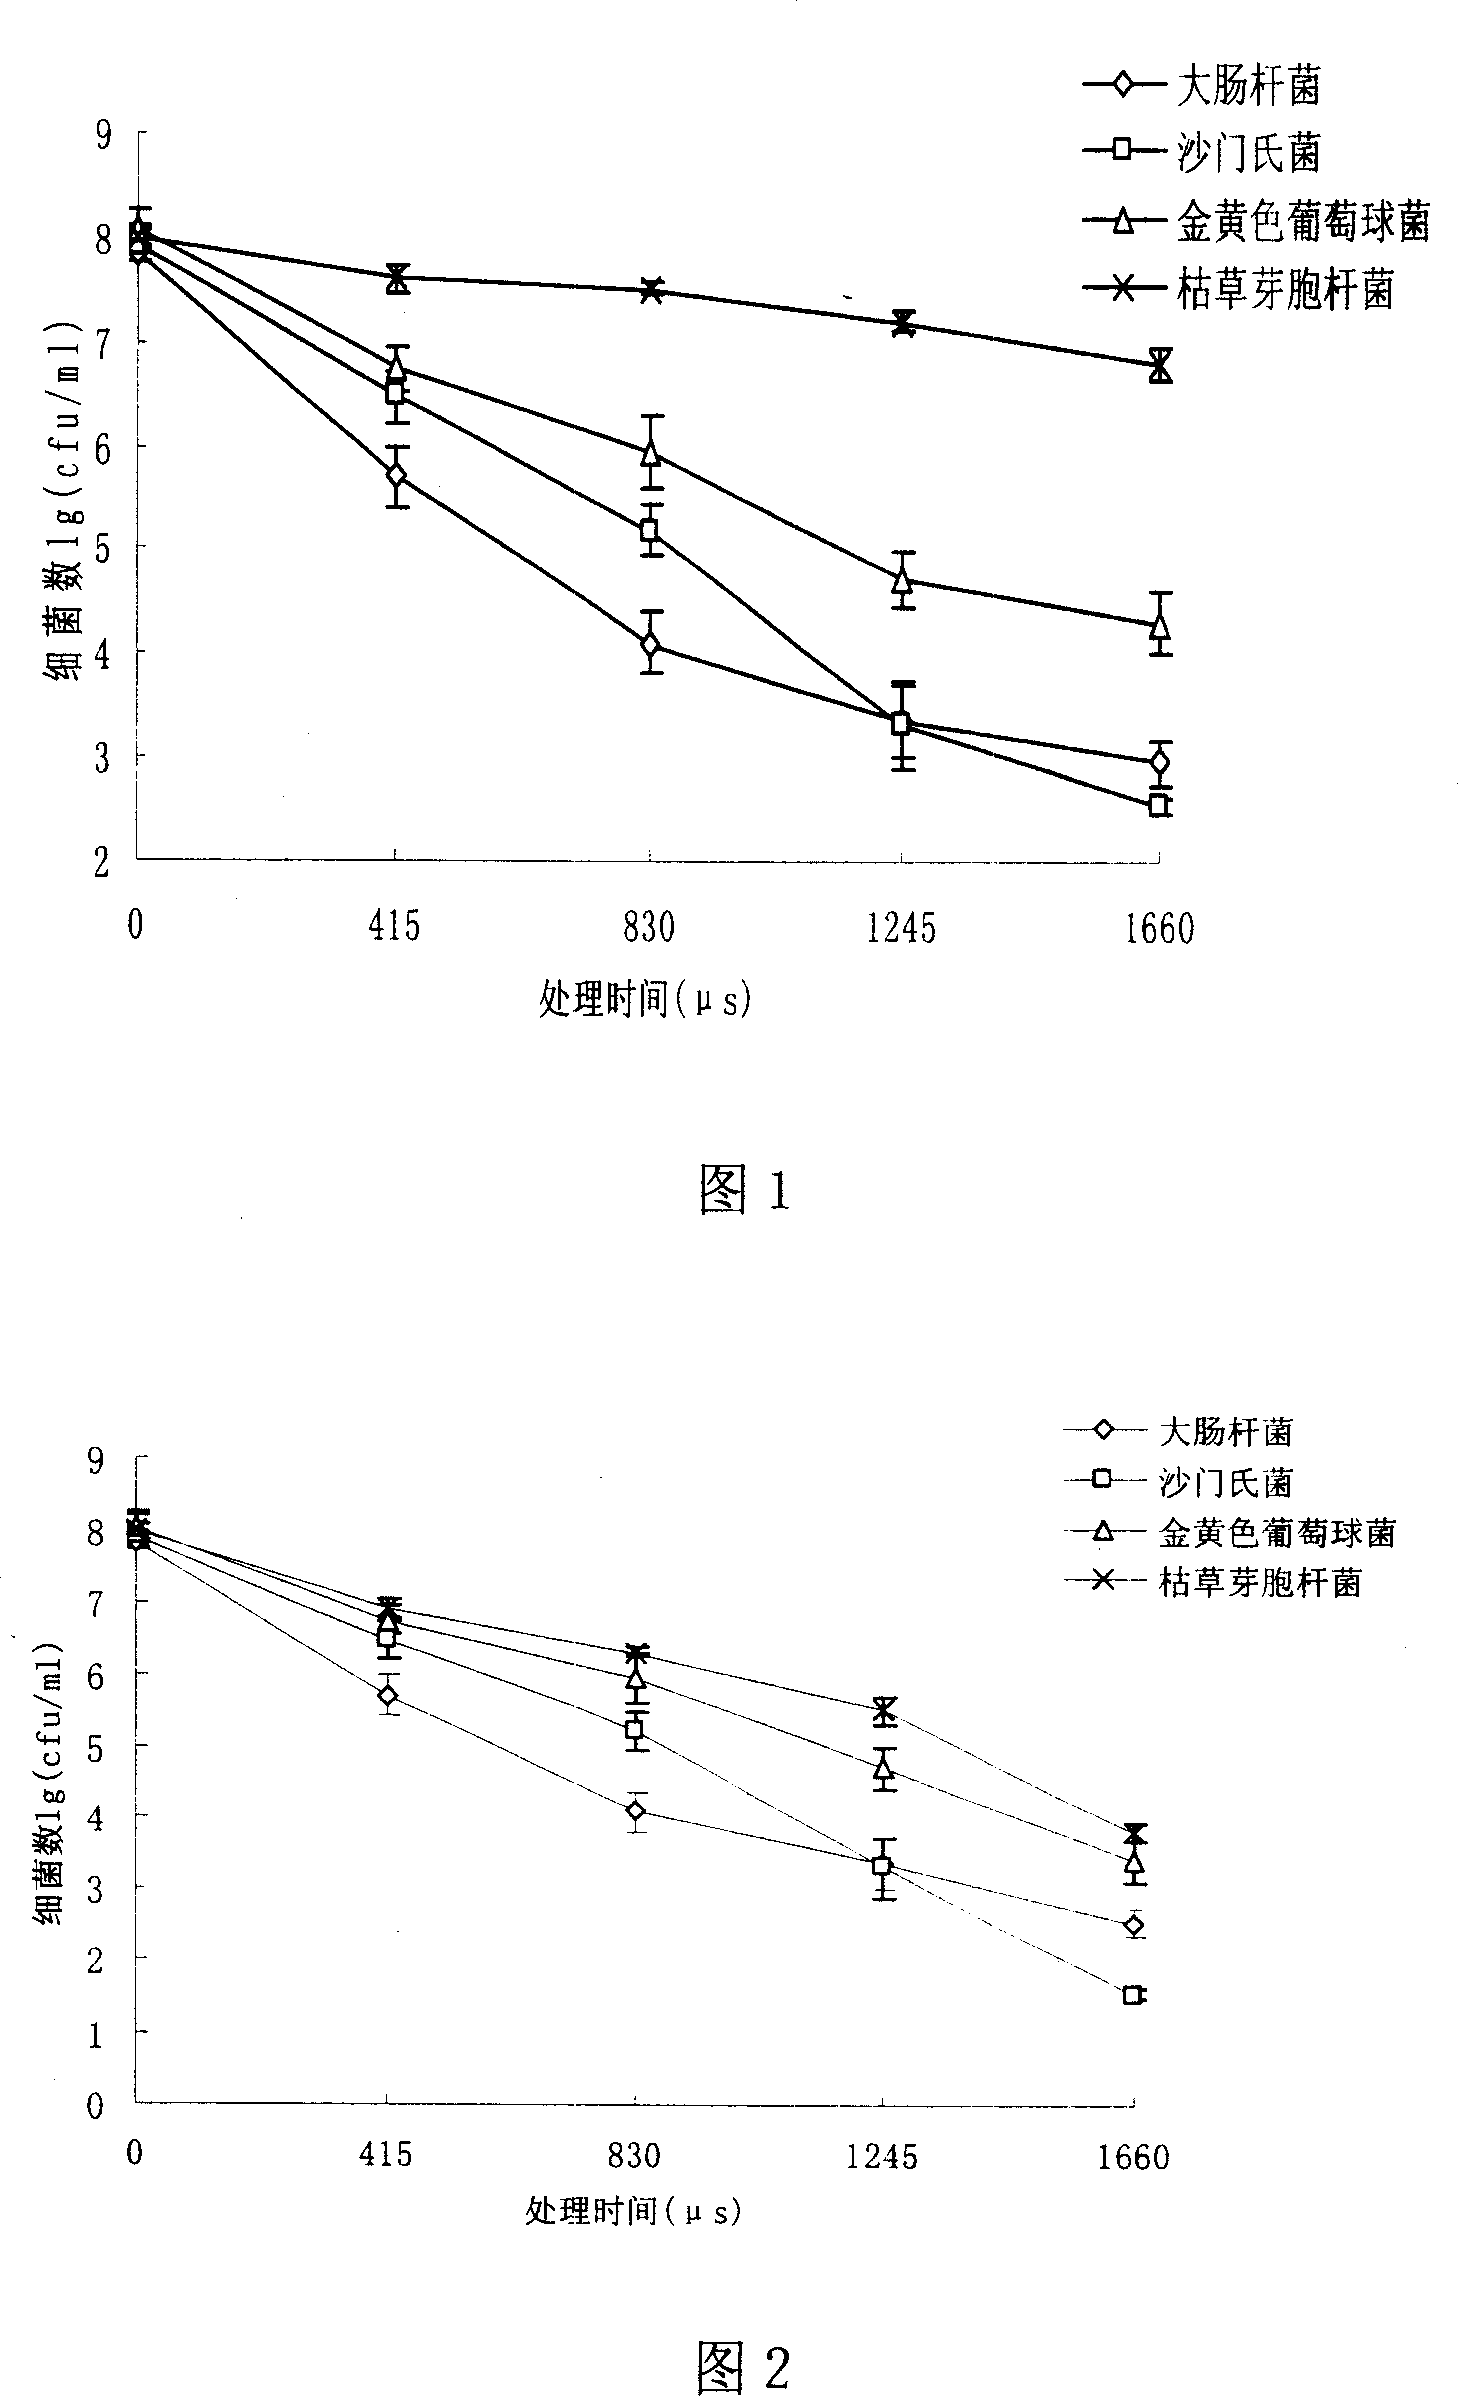 Method for producing liquor egg product using non-thermal sterilization technology